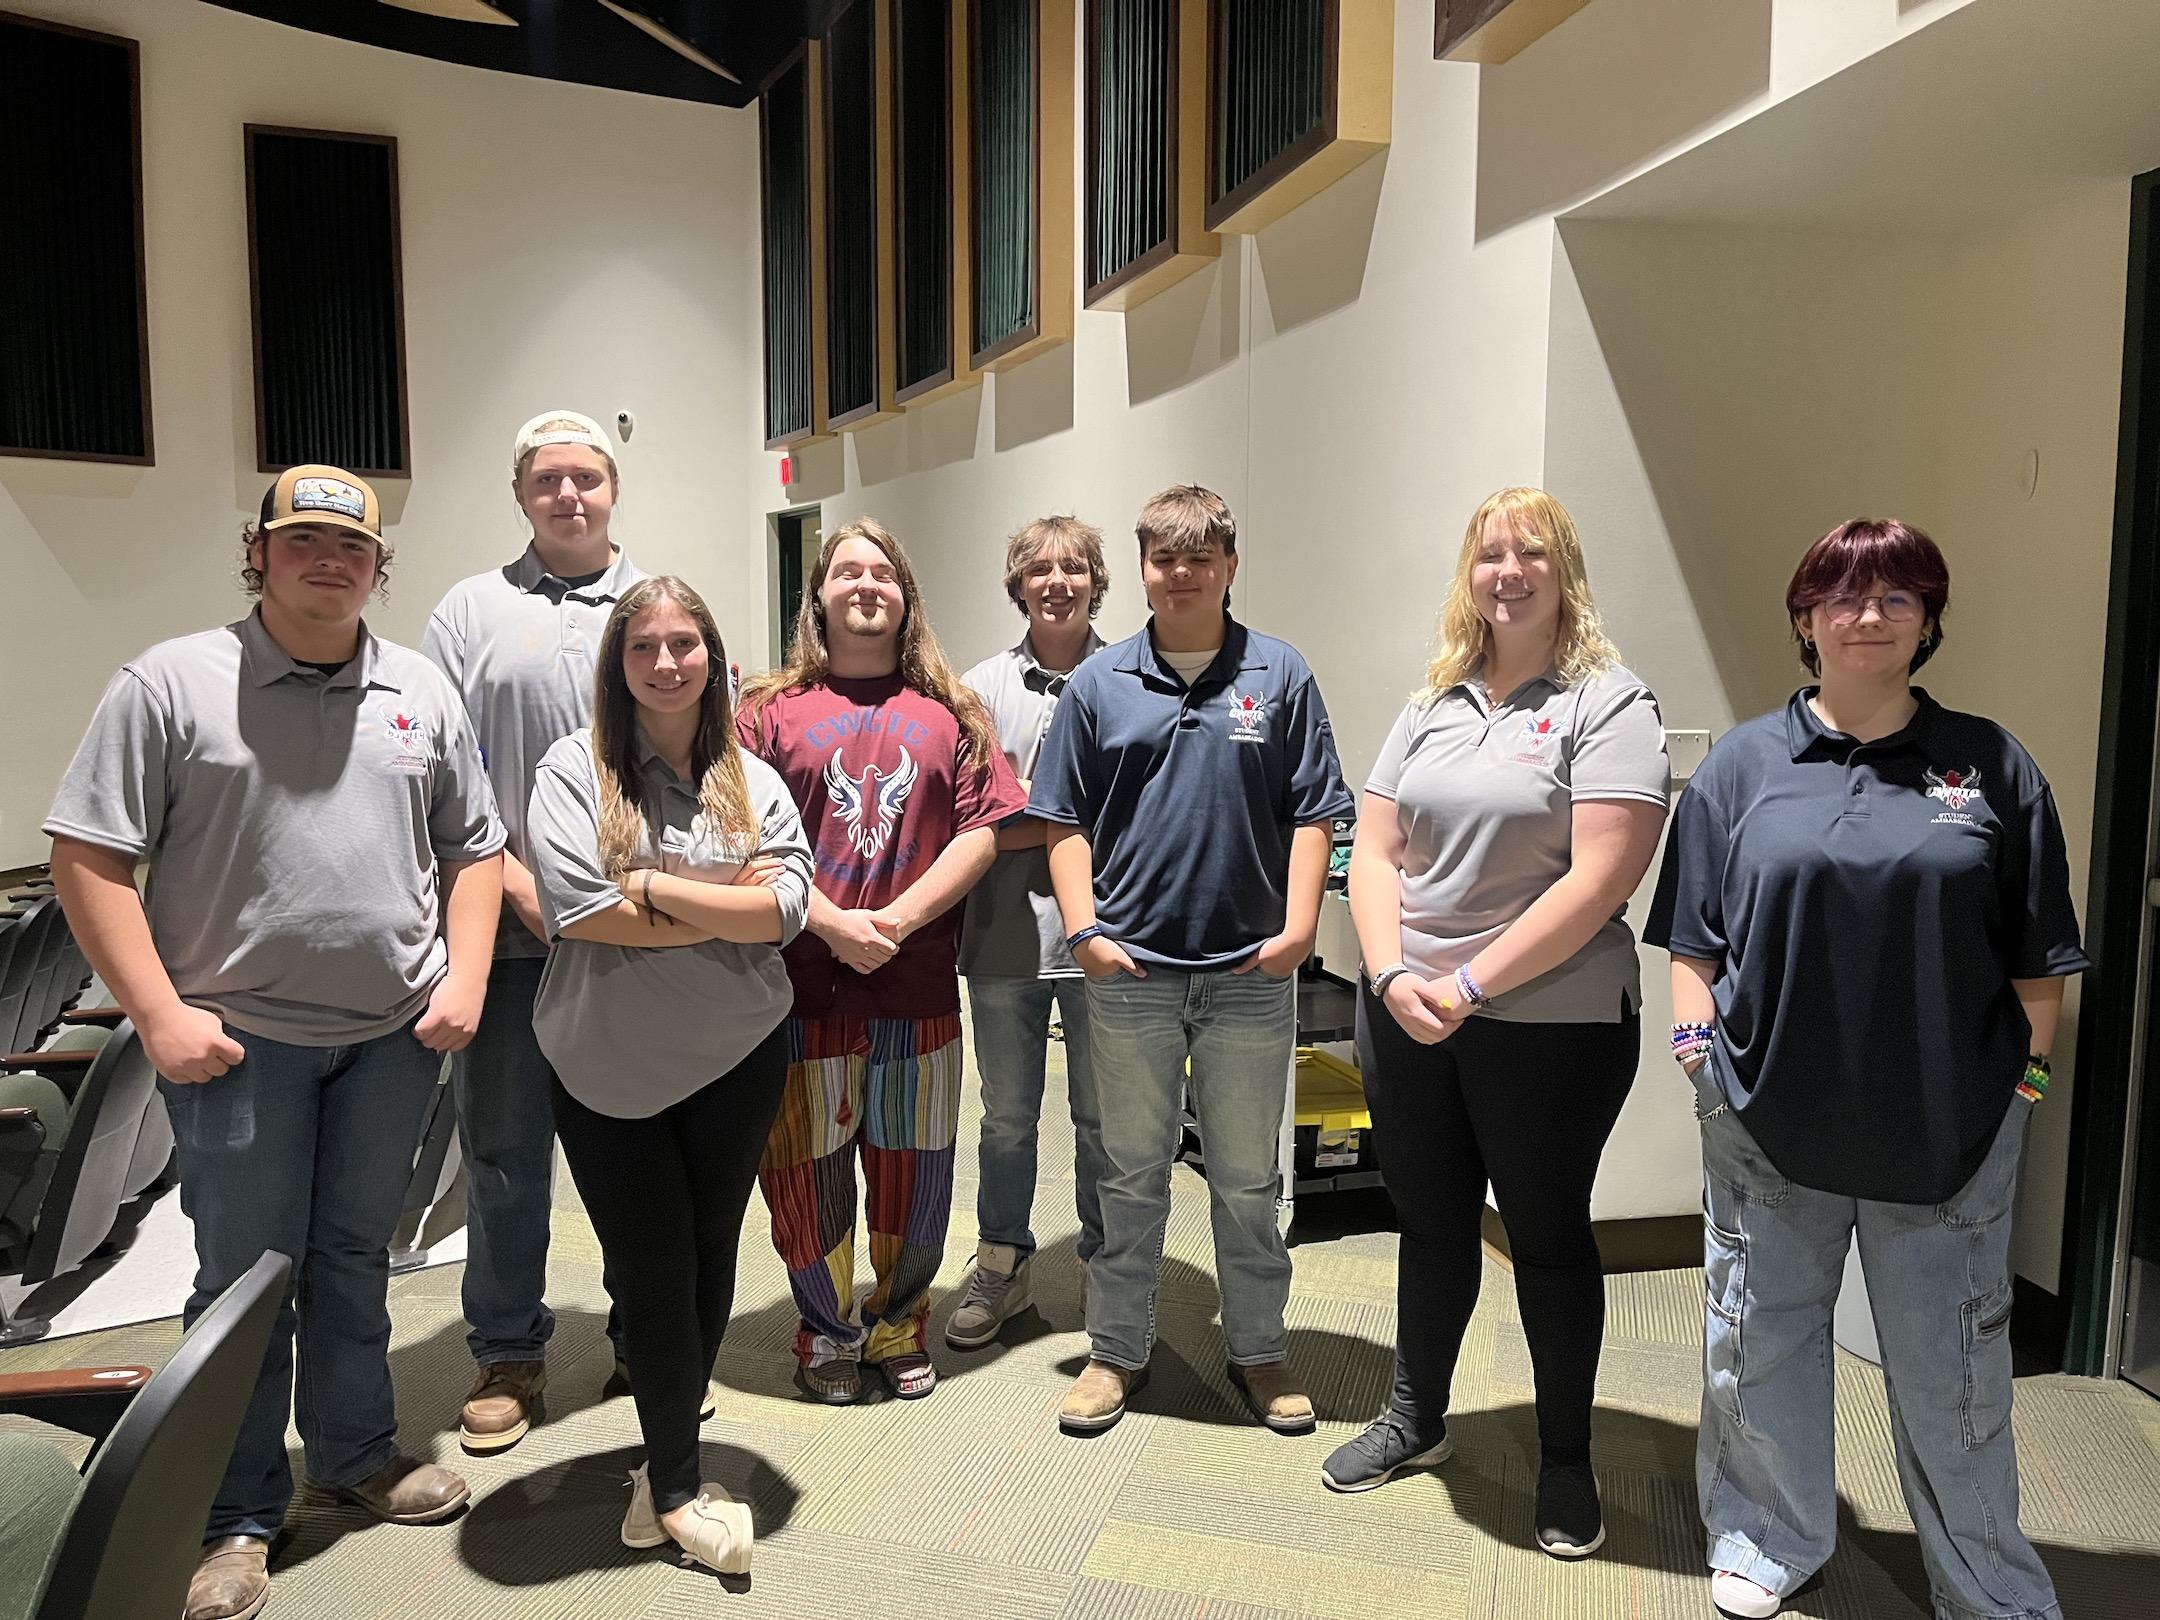 Penn-Trafford students who are currently enrolled at CWCTC acted as ambassadors; left to right:  Keaton Supancic- Powerline, Nathan Lasitis- Robotics Engineering & Manufacturing, Lizzie Noble- Sports Medicine, Hayden Inman- Protective Service, Chase Morocco- Architecture & Landscape Design, Kaleb Hacker- HVAC & Steamfitting, Savannah Palazzo- Health Occupations, and Teagan Brennan- Multimedia Design